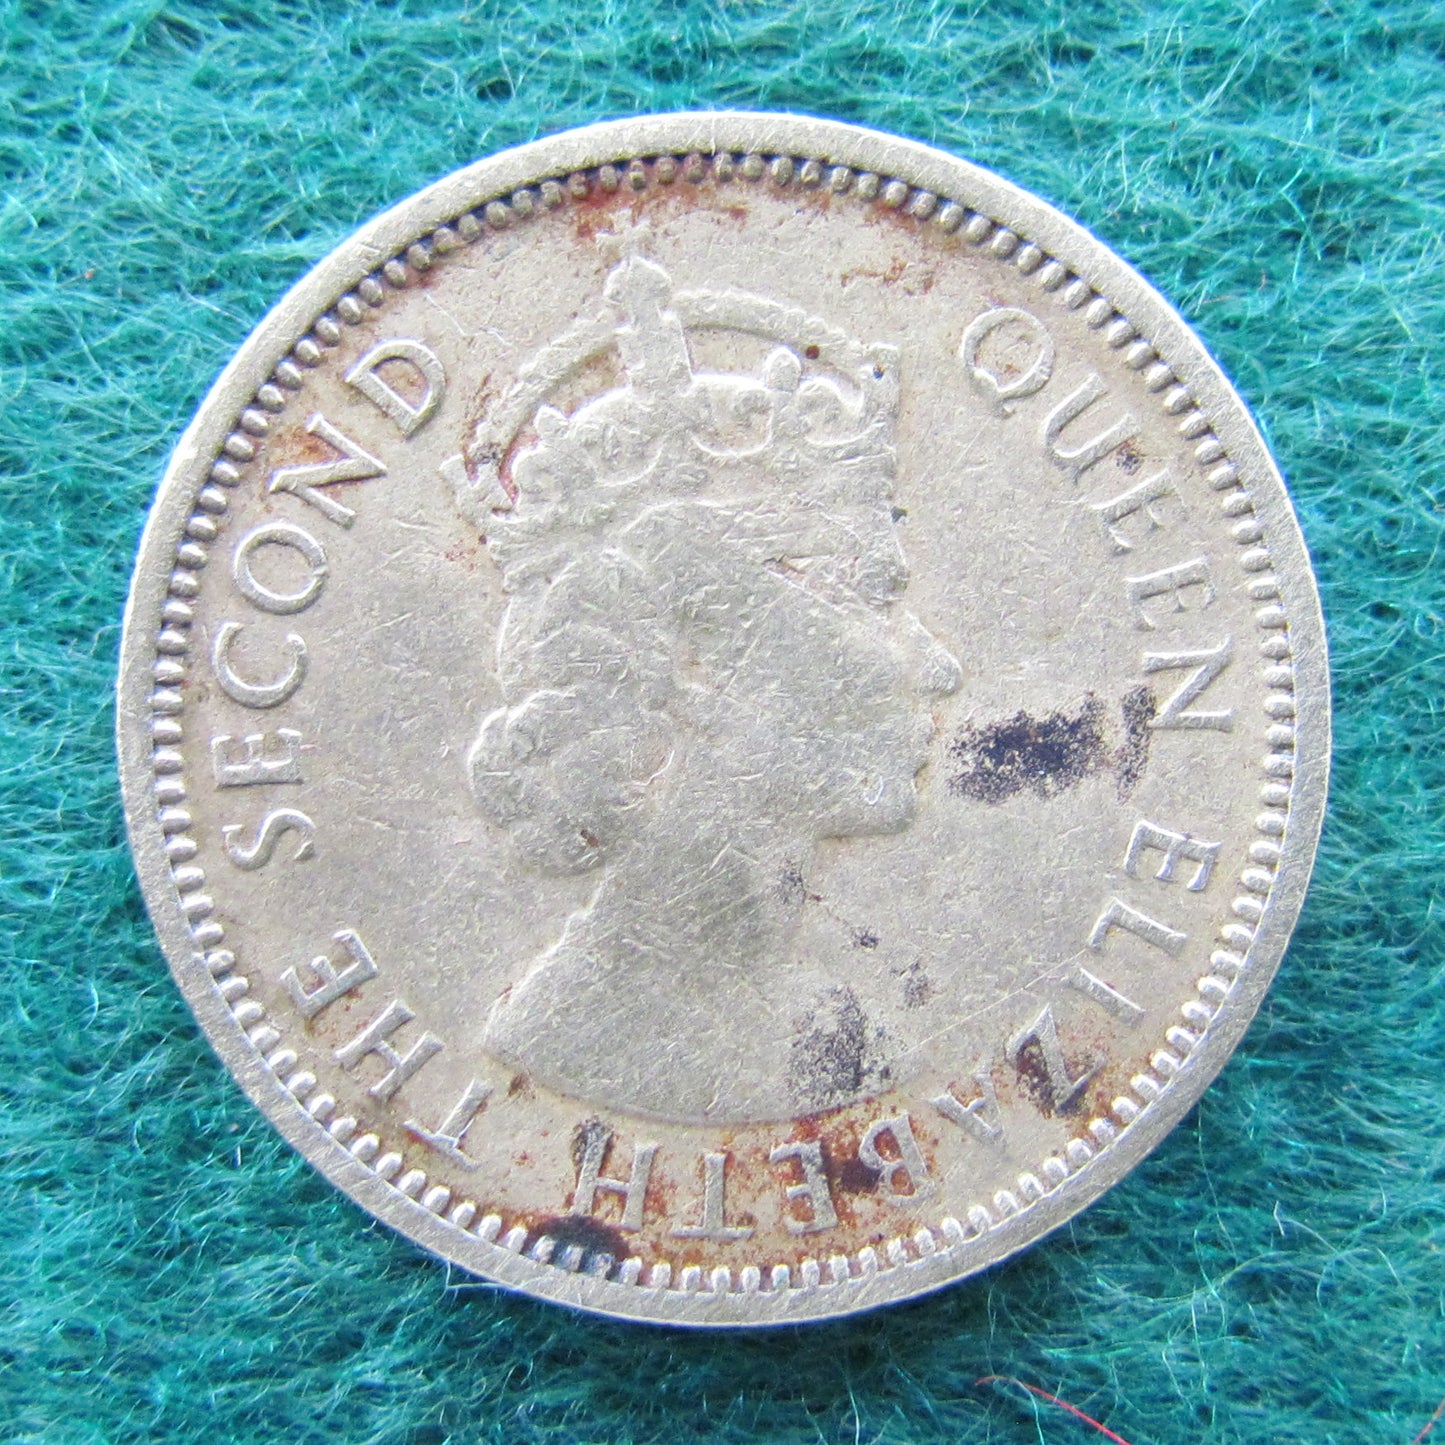 British Caribbean Territories Eastern Group 1955 Five Cent Queen Elizabeth II Coin - Circulated